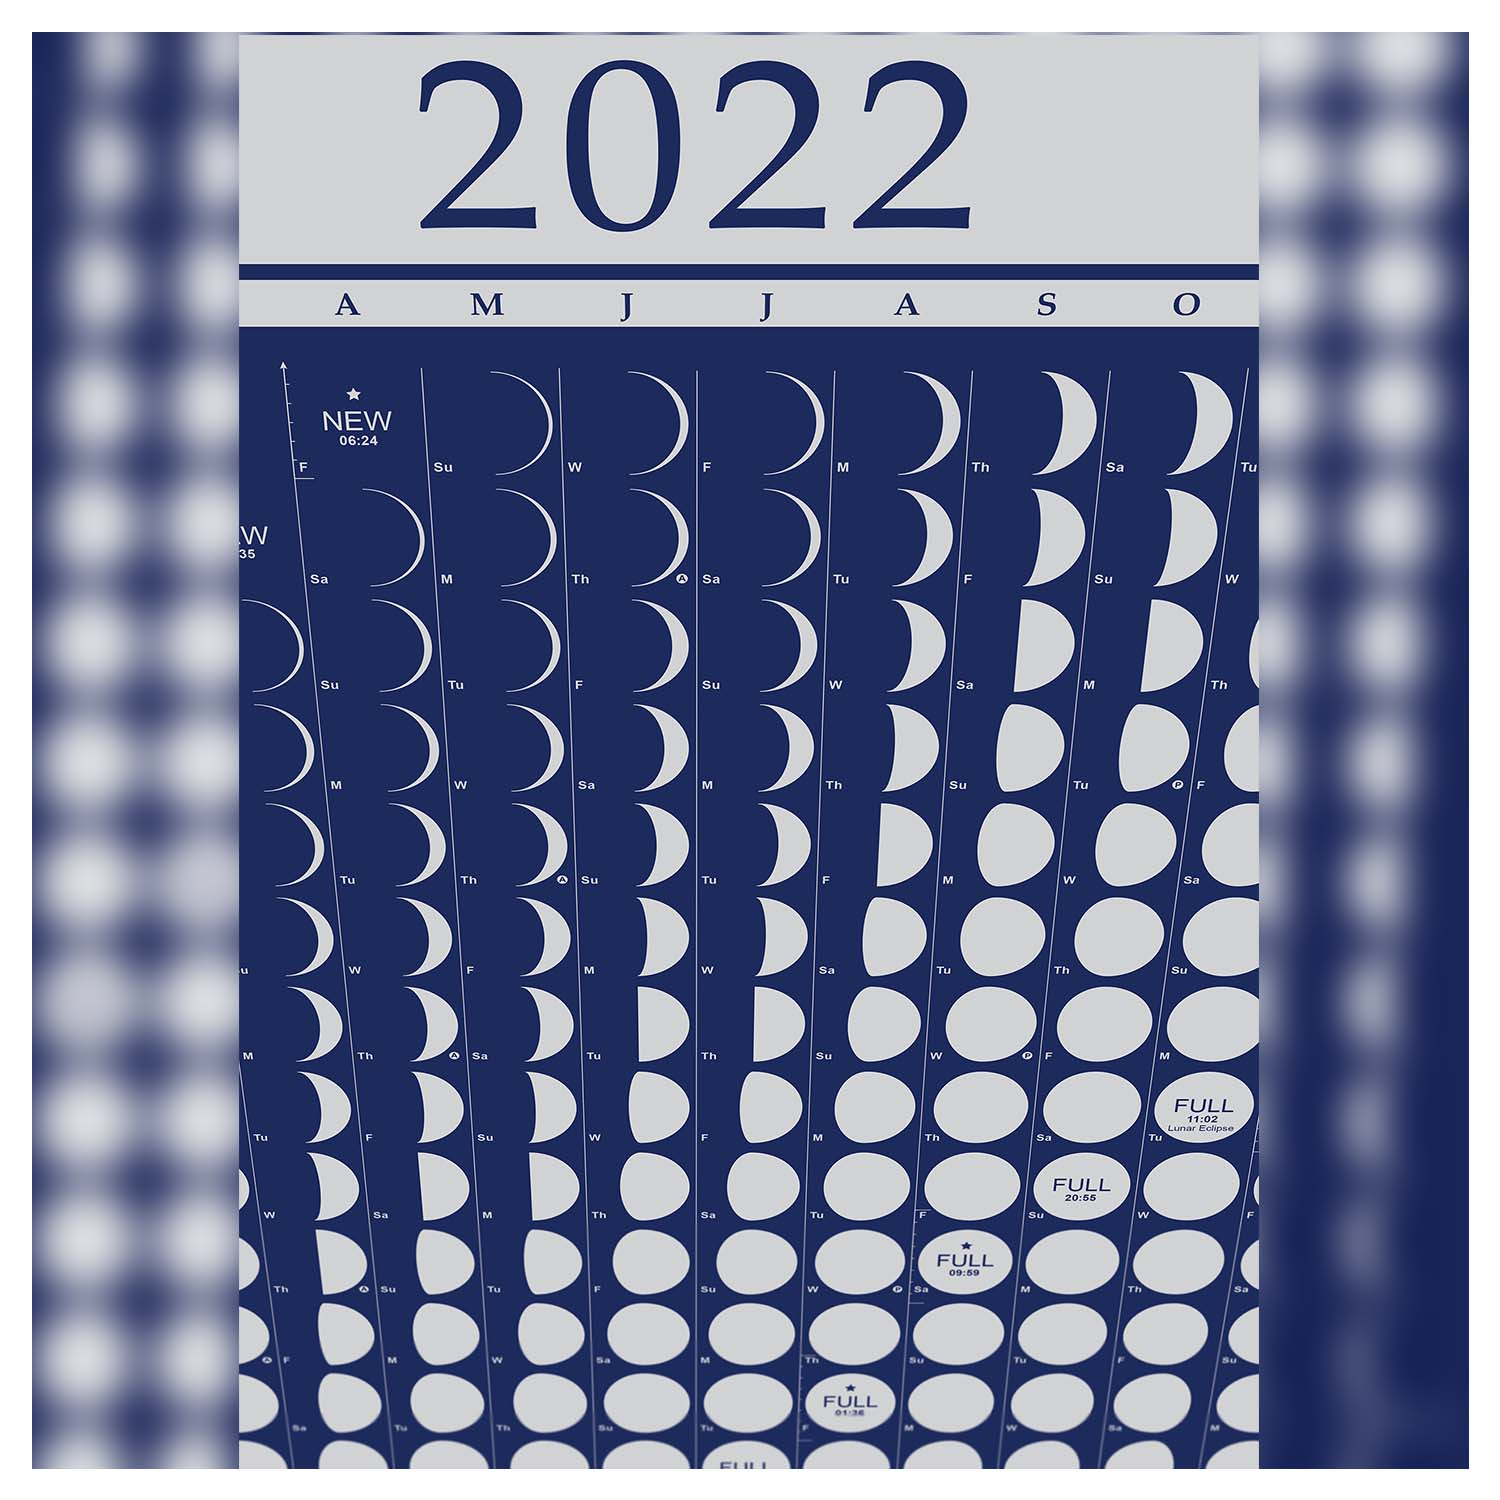 Moon Phase Schedule 2022 Moonphase Calendar 2022